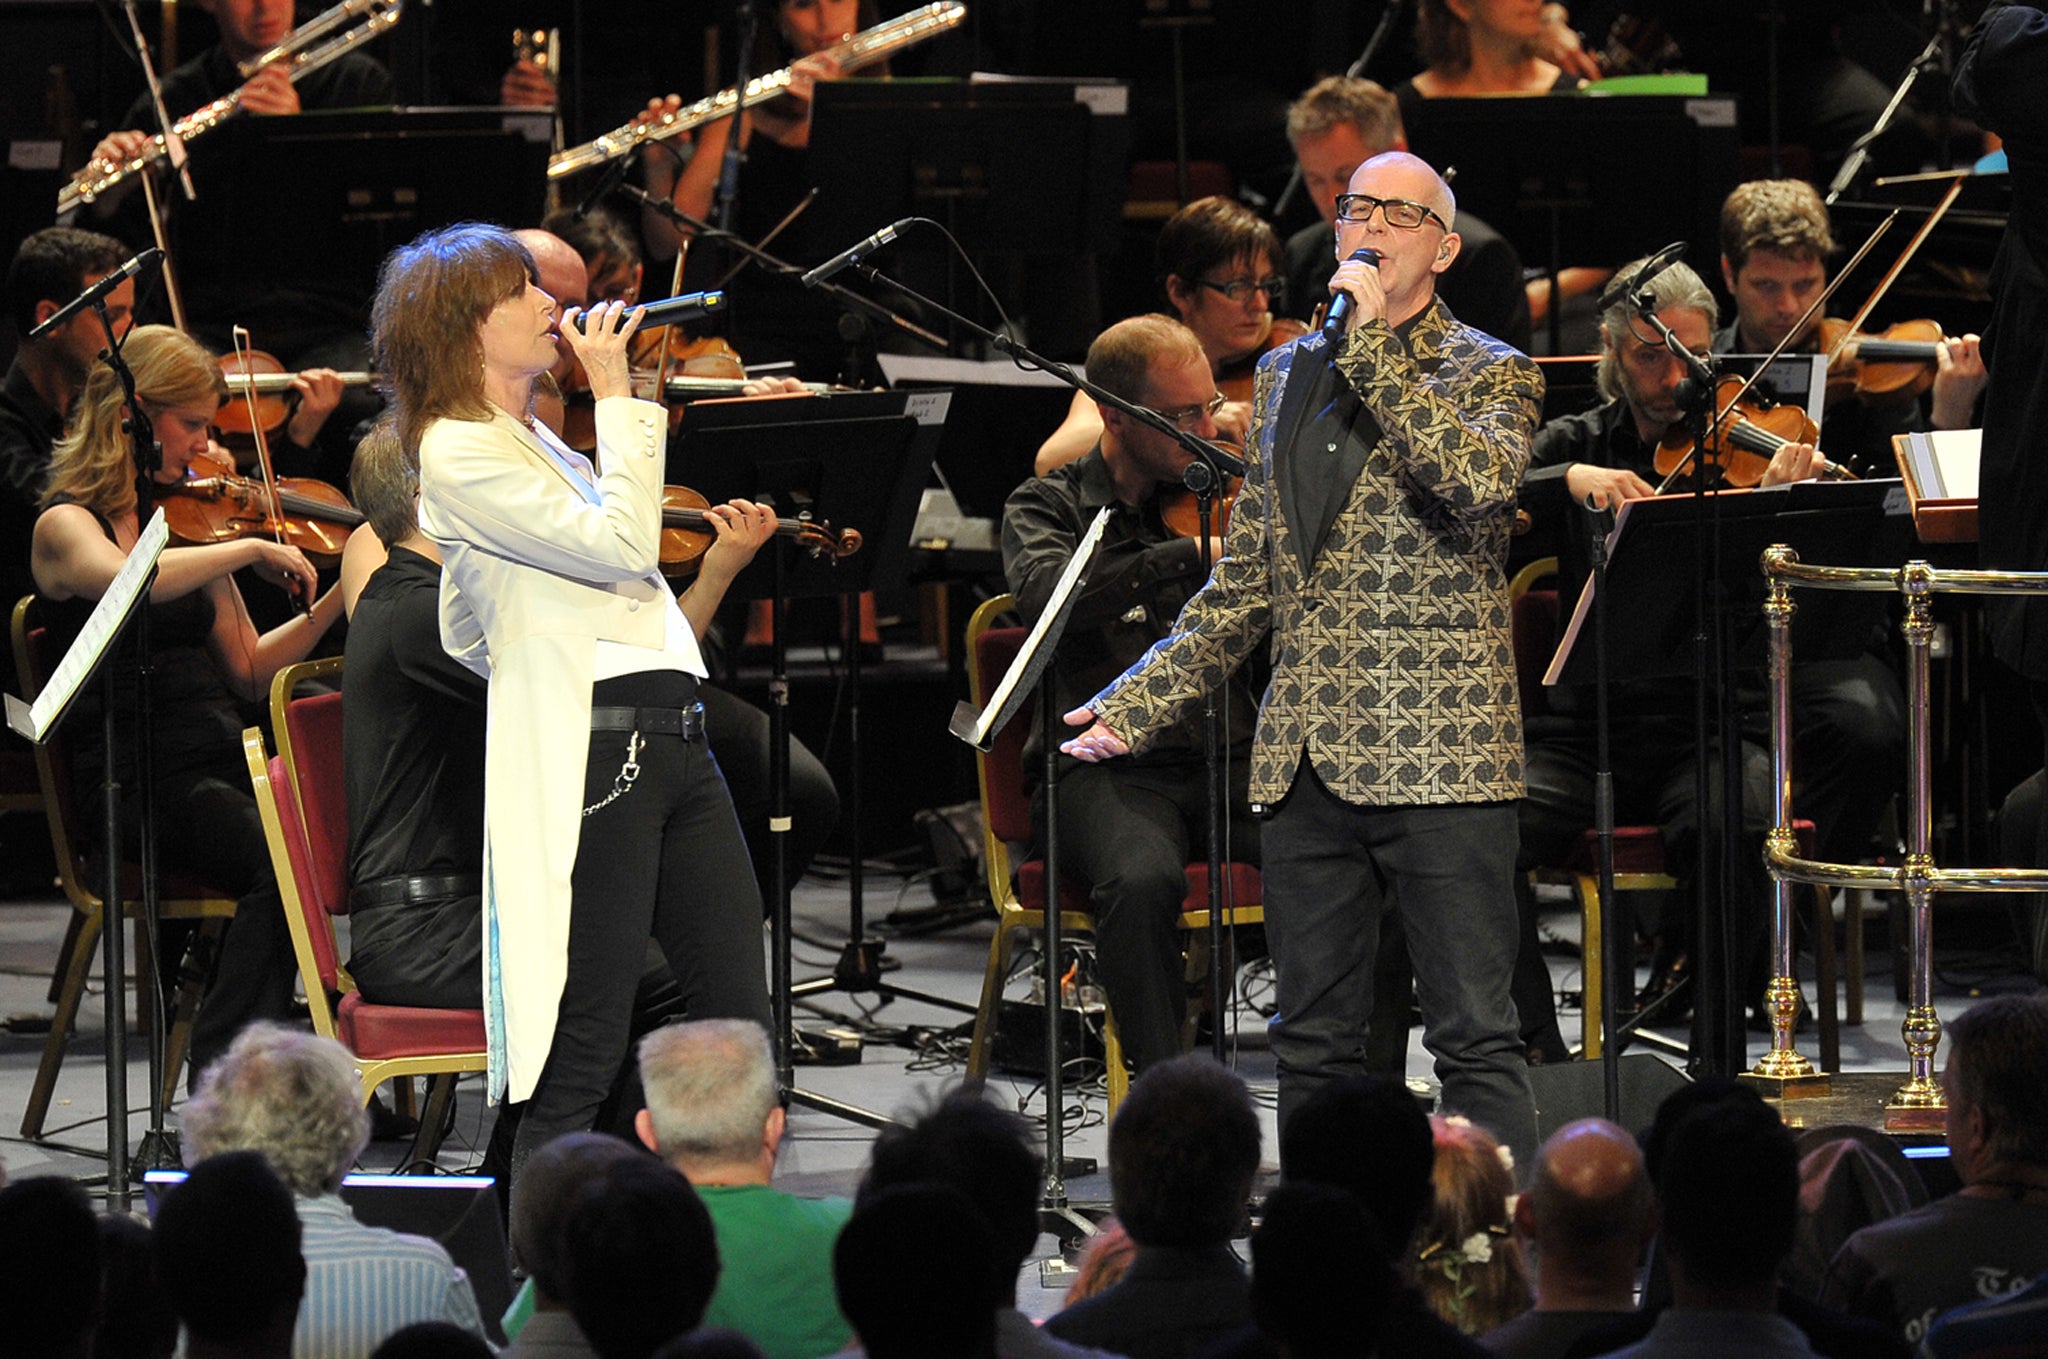 Chrissie Hynde and Neil Tennant perform with the BBC Concert Orchestra conducted by Dominic Wheeler at the BBC Proms 2014